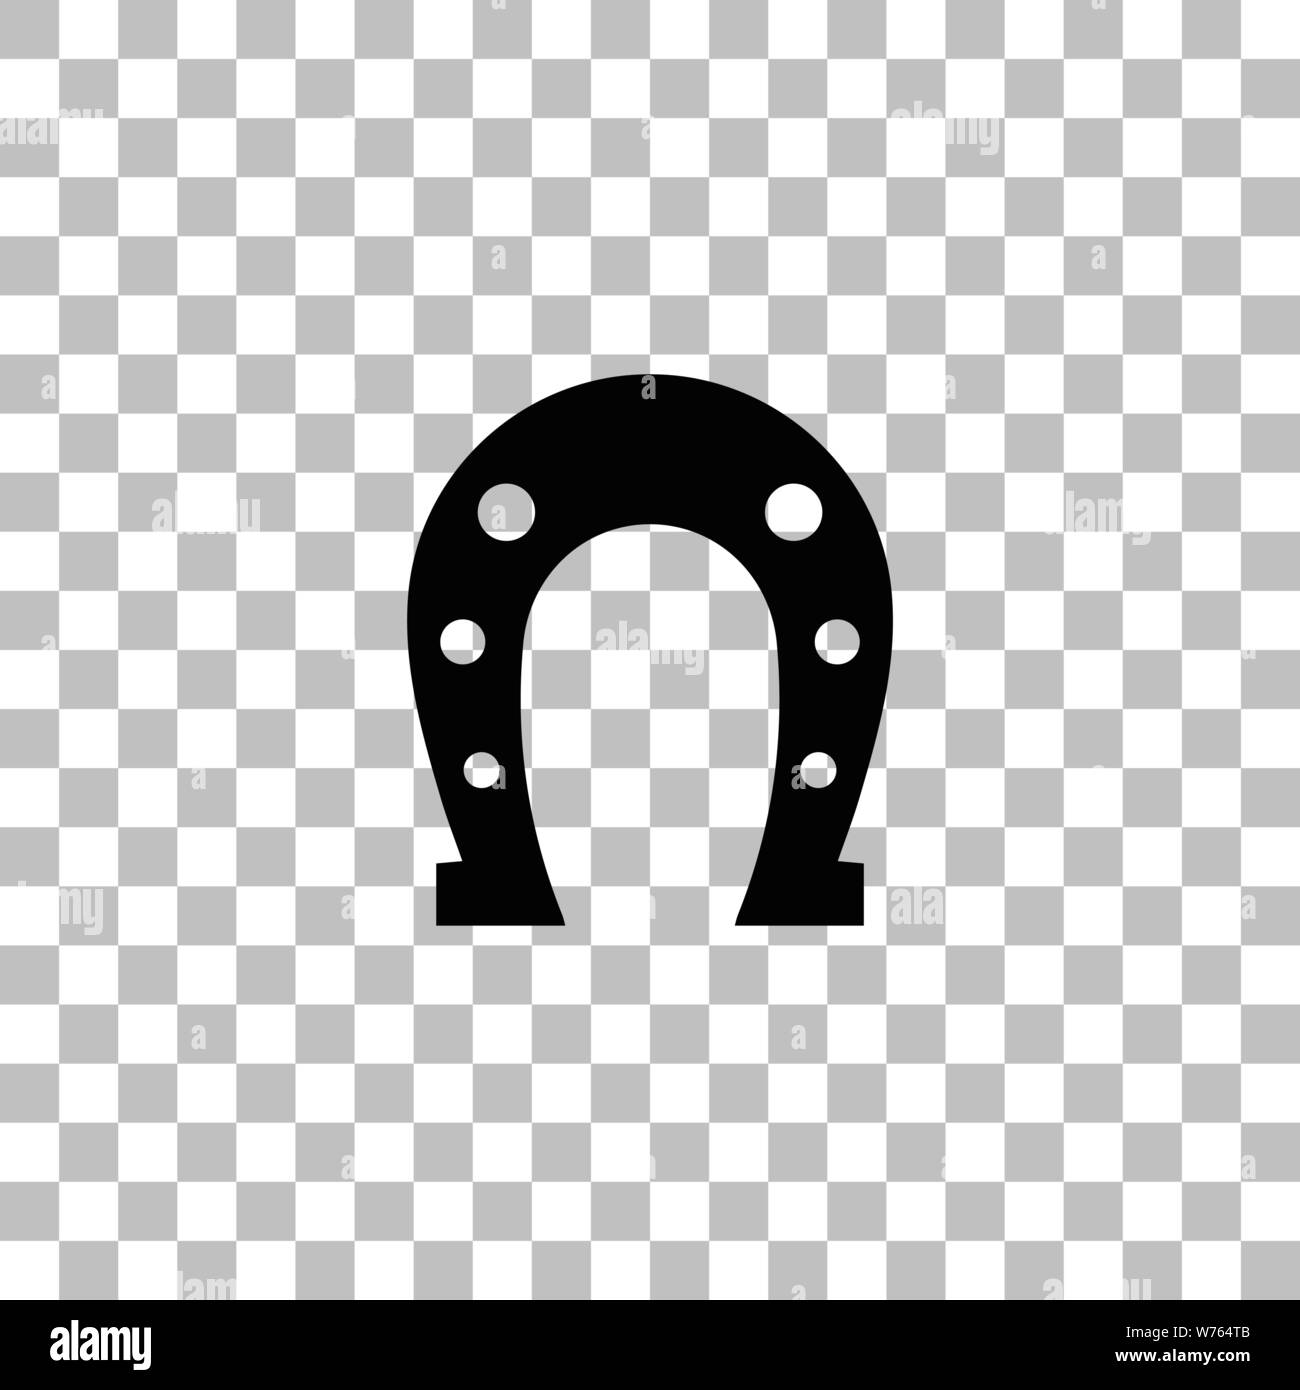 Horseshoe. Black flat icon on a transparent background. Pictogram for your project Stock Vector